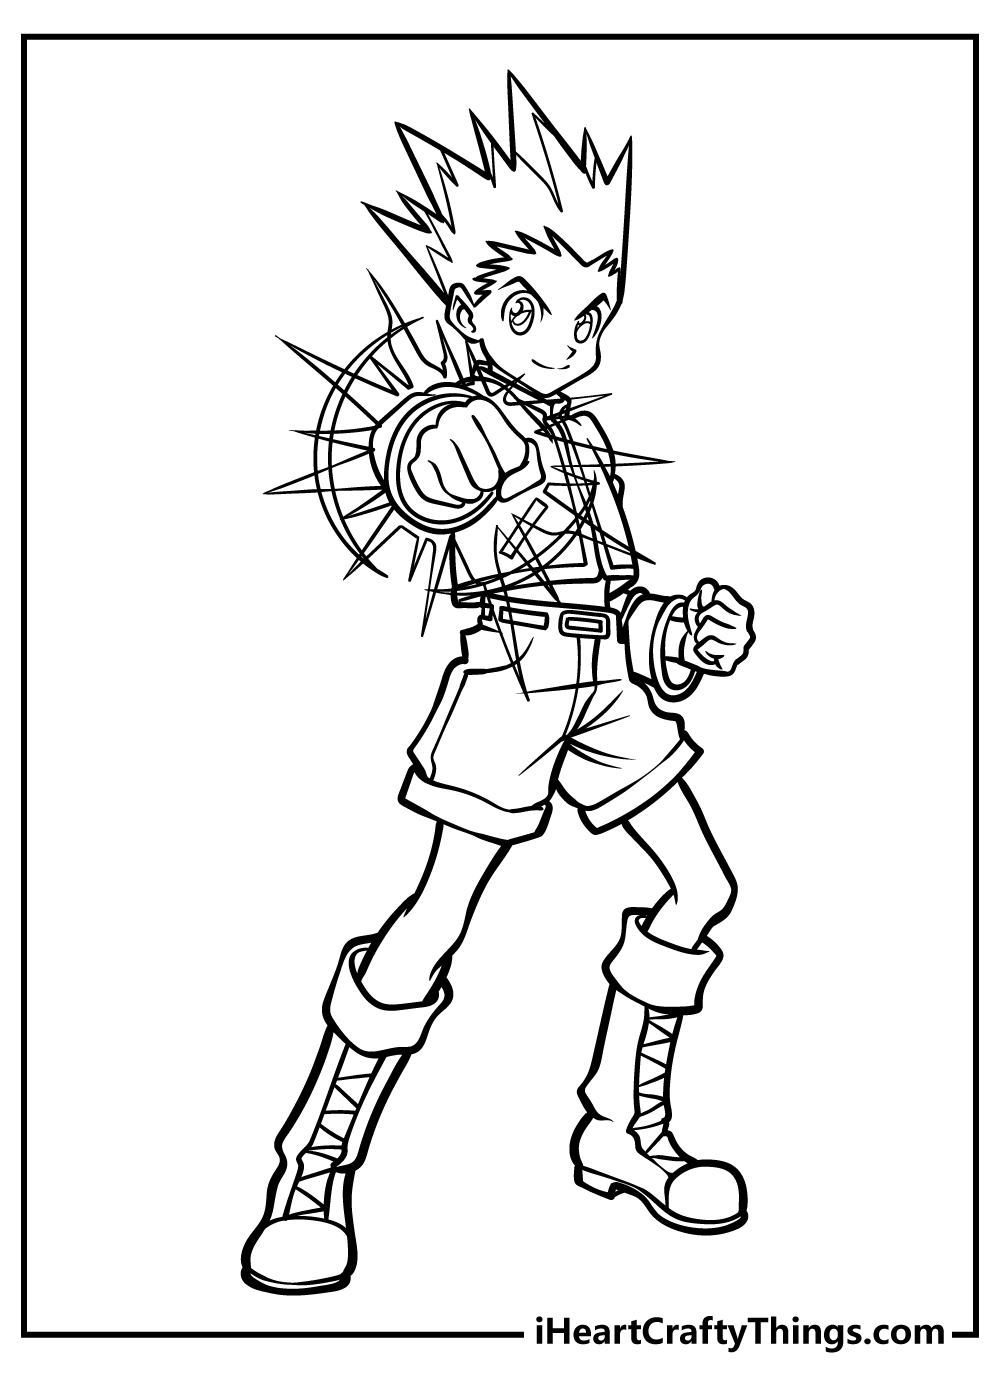 Anime Coloring Pages free printable for kids